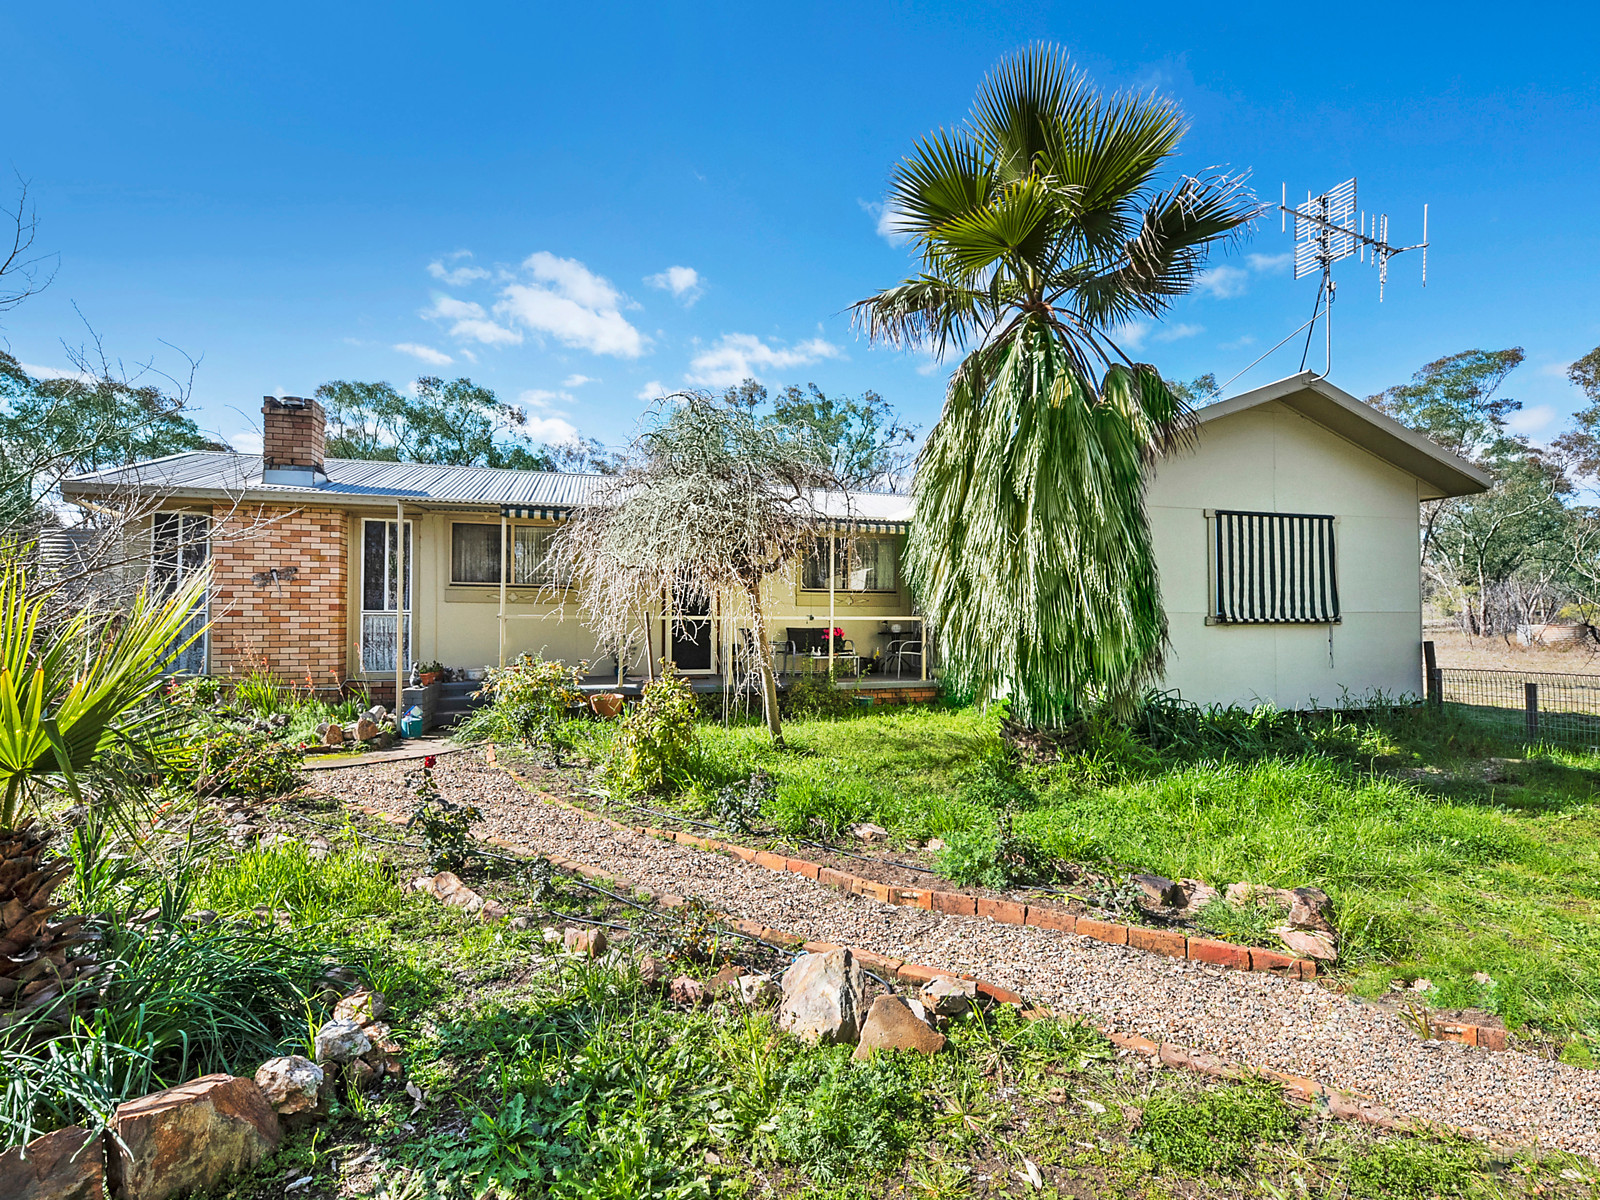 Sold Rural Property 754 Yarrawonga Road Mudgee Nsw 2850 Apr 9 2021 Homely